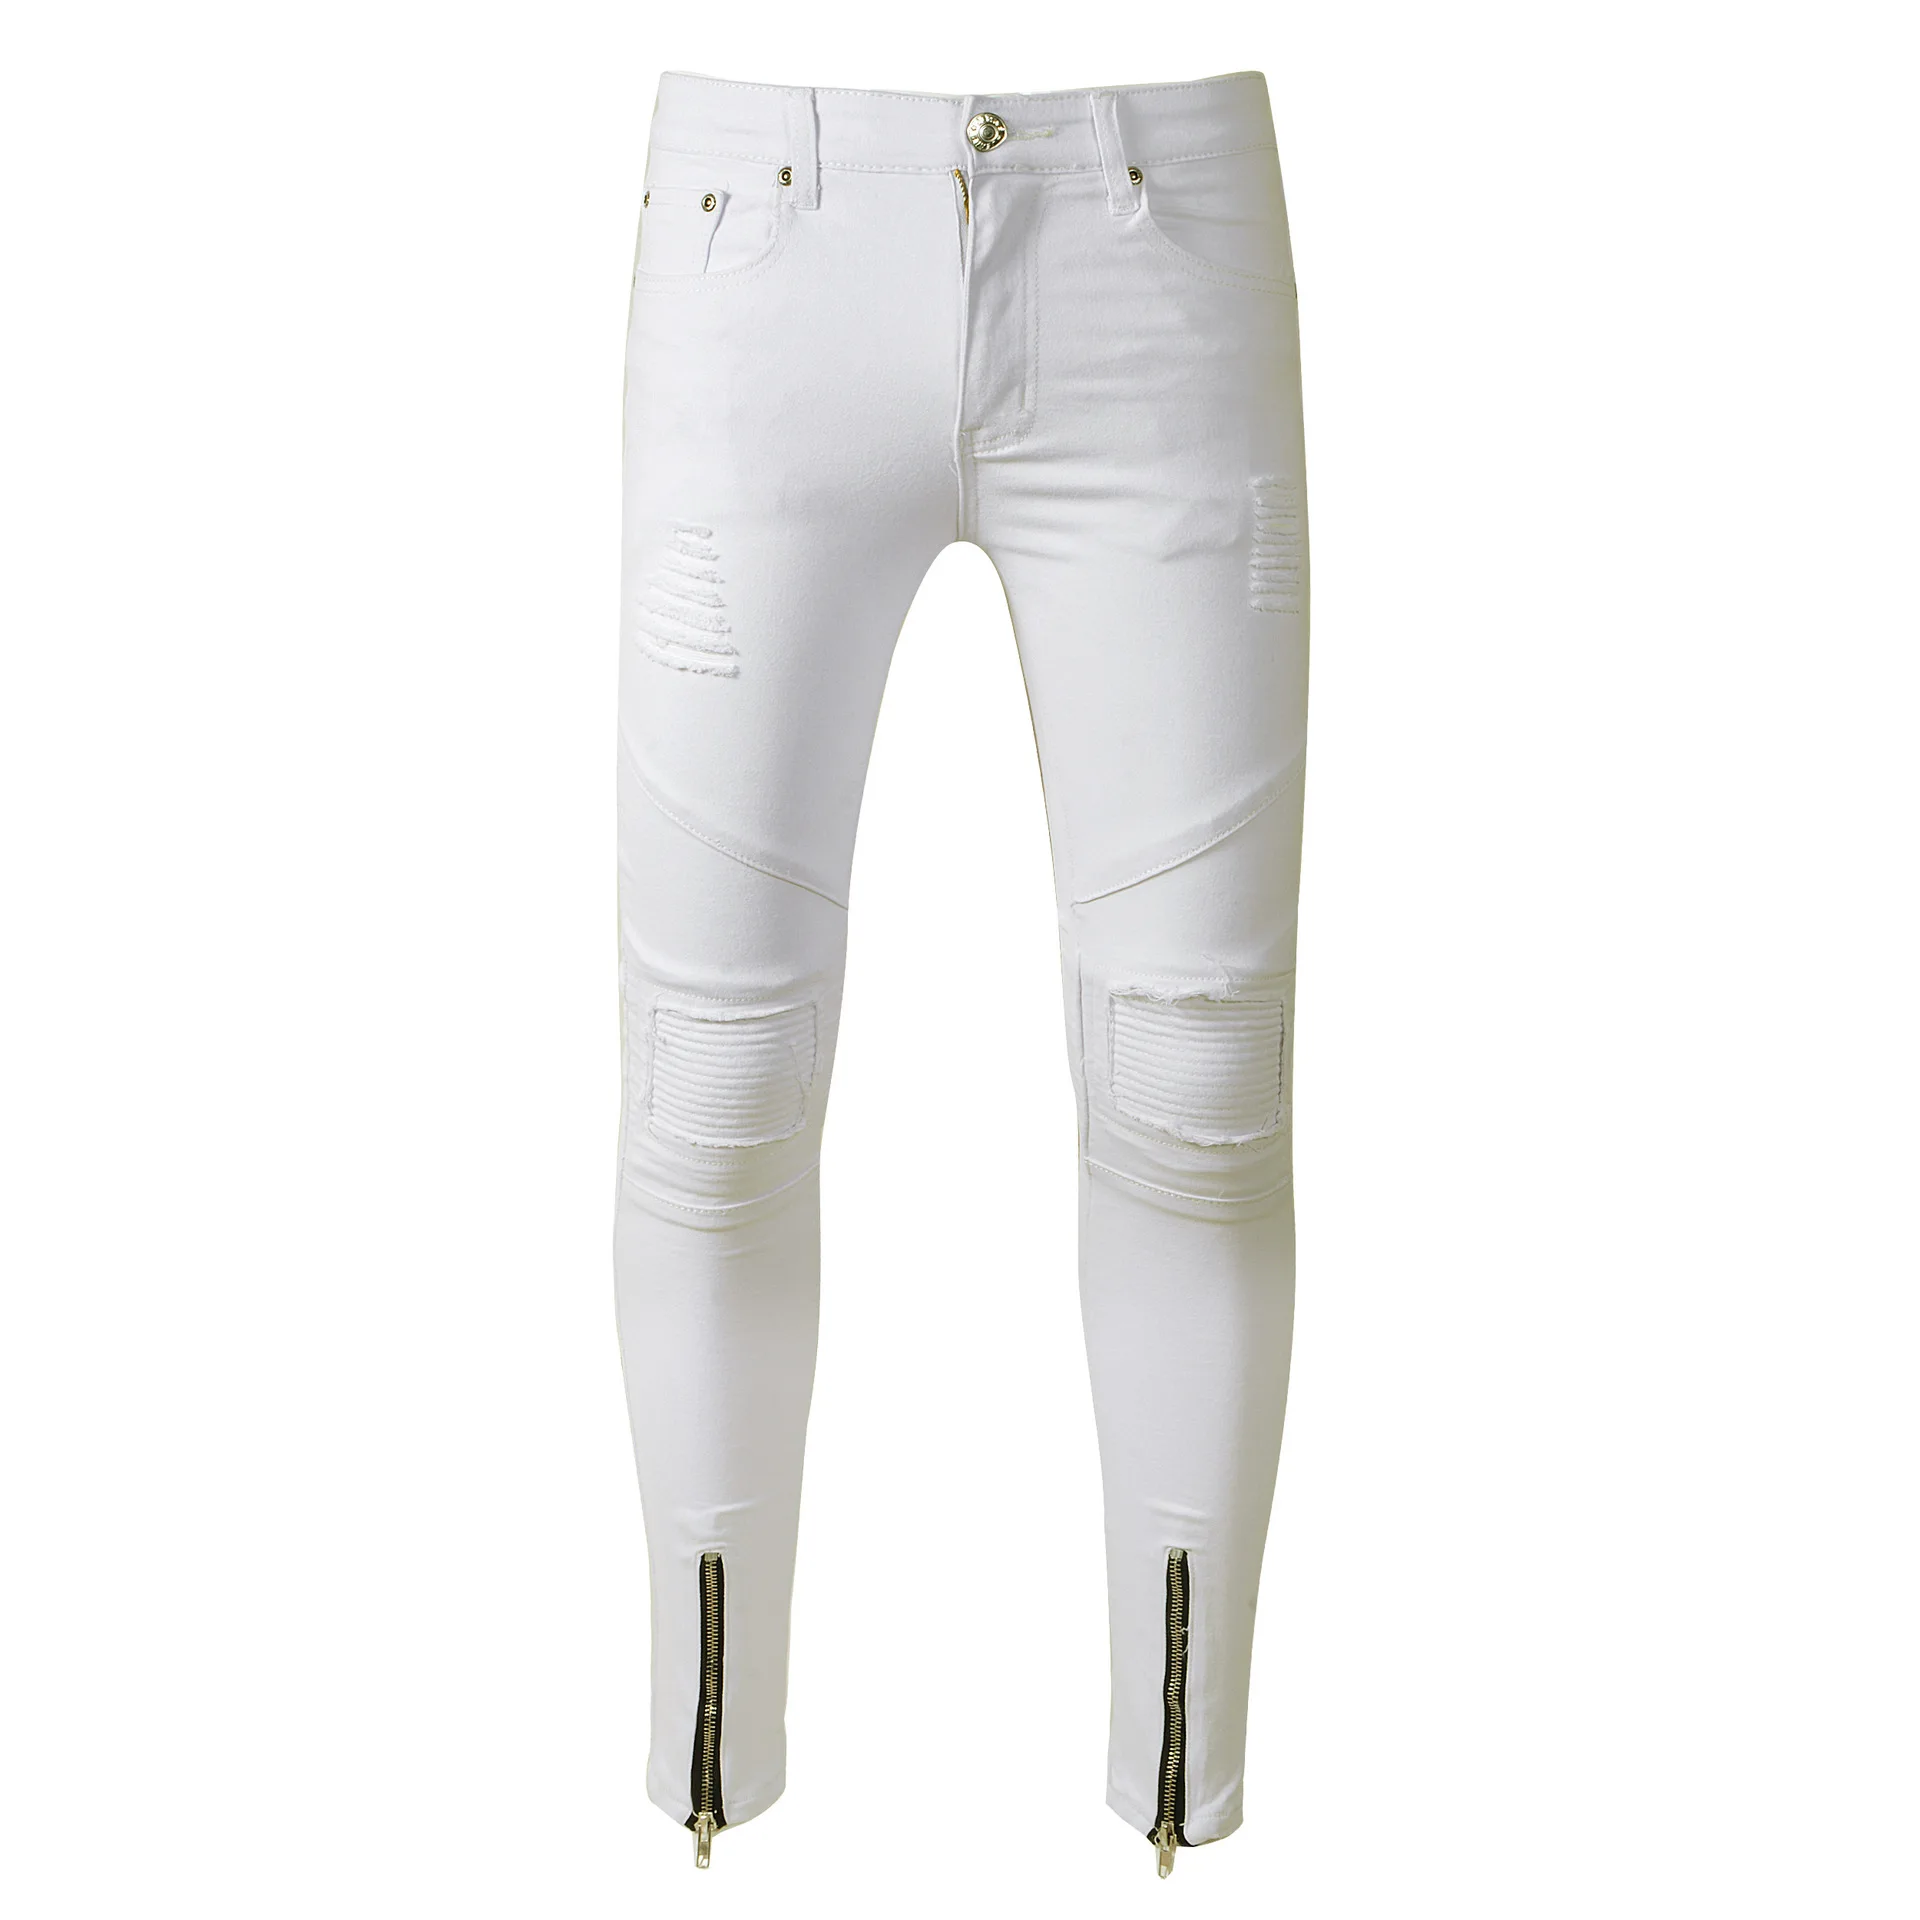 A Pair Denim Pant Latest New Style Boy White Skinny Jeans - Buy A Pair Of Jeans,Denim Jeans Pants,Latest Design Jeans Pants Product on Alibaba.com